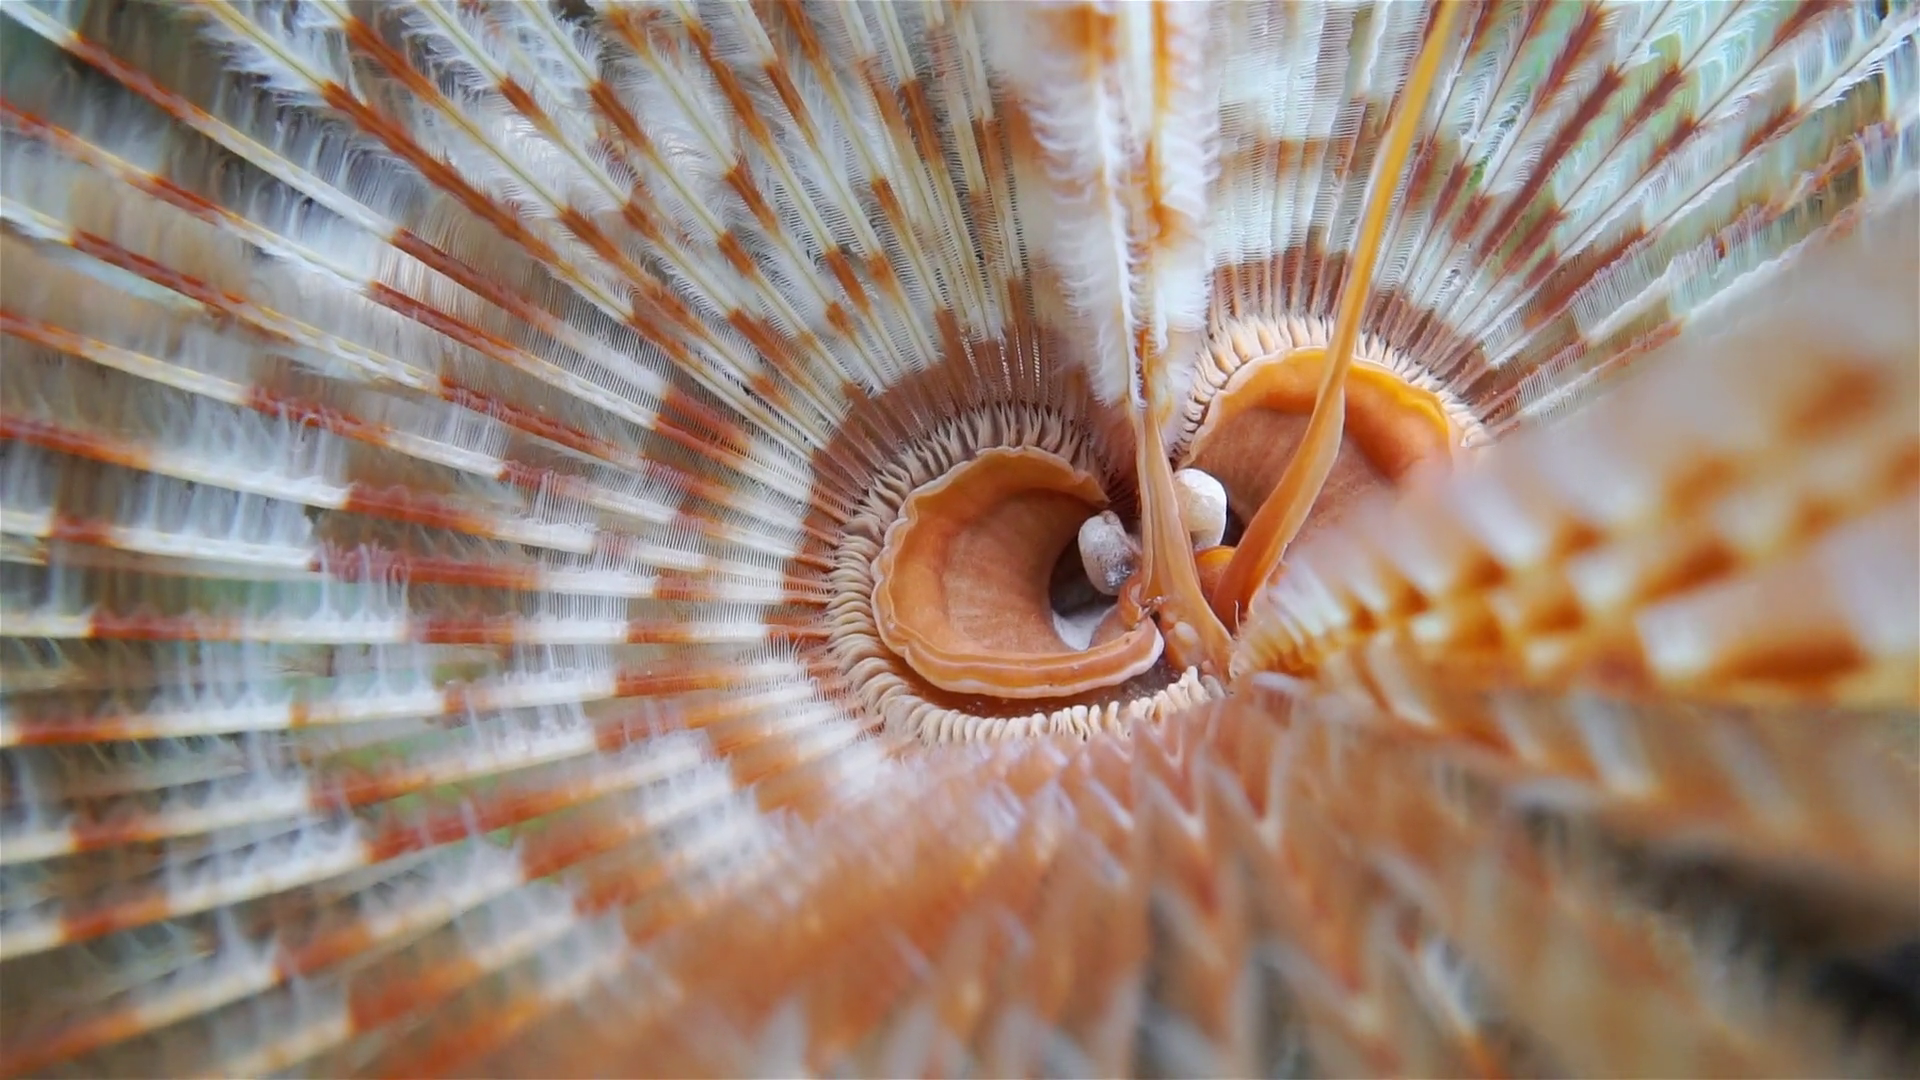 underwater-sea-life-head-of-a-magnificent-feather-duster-worm-sabellastarte-magnifica-caribbean-sea_b0kaka_p_thumbnail-full01.png